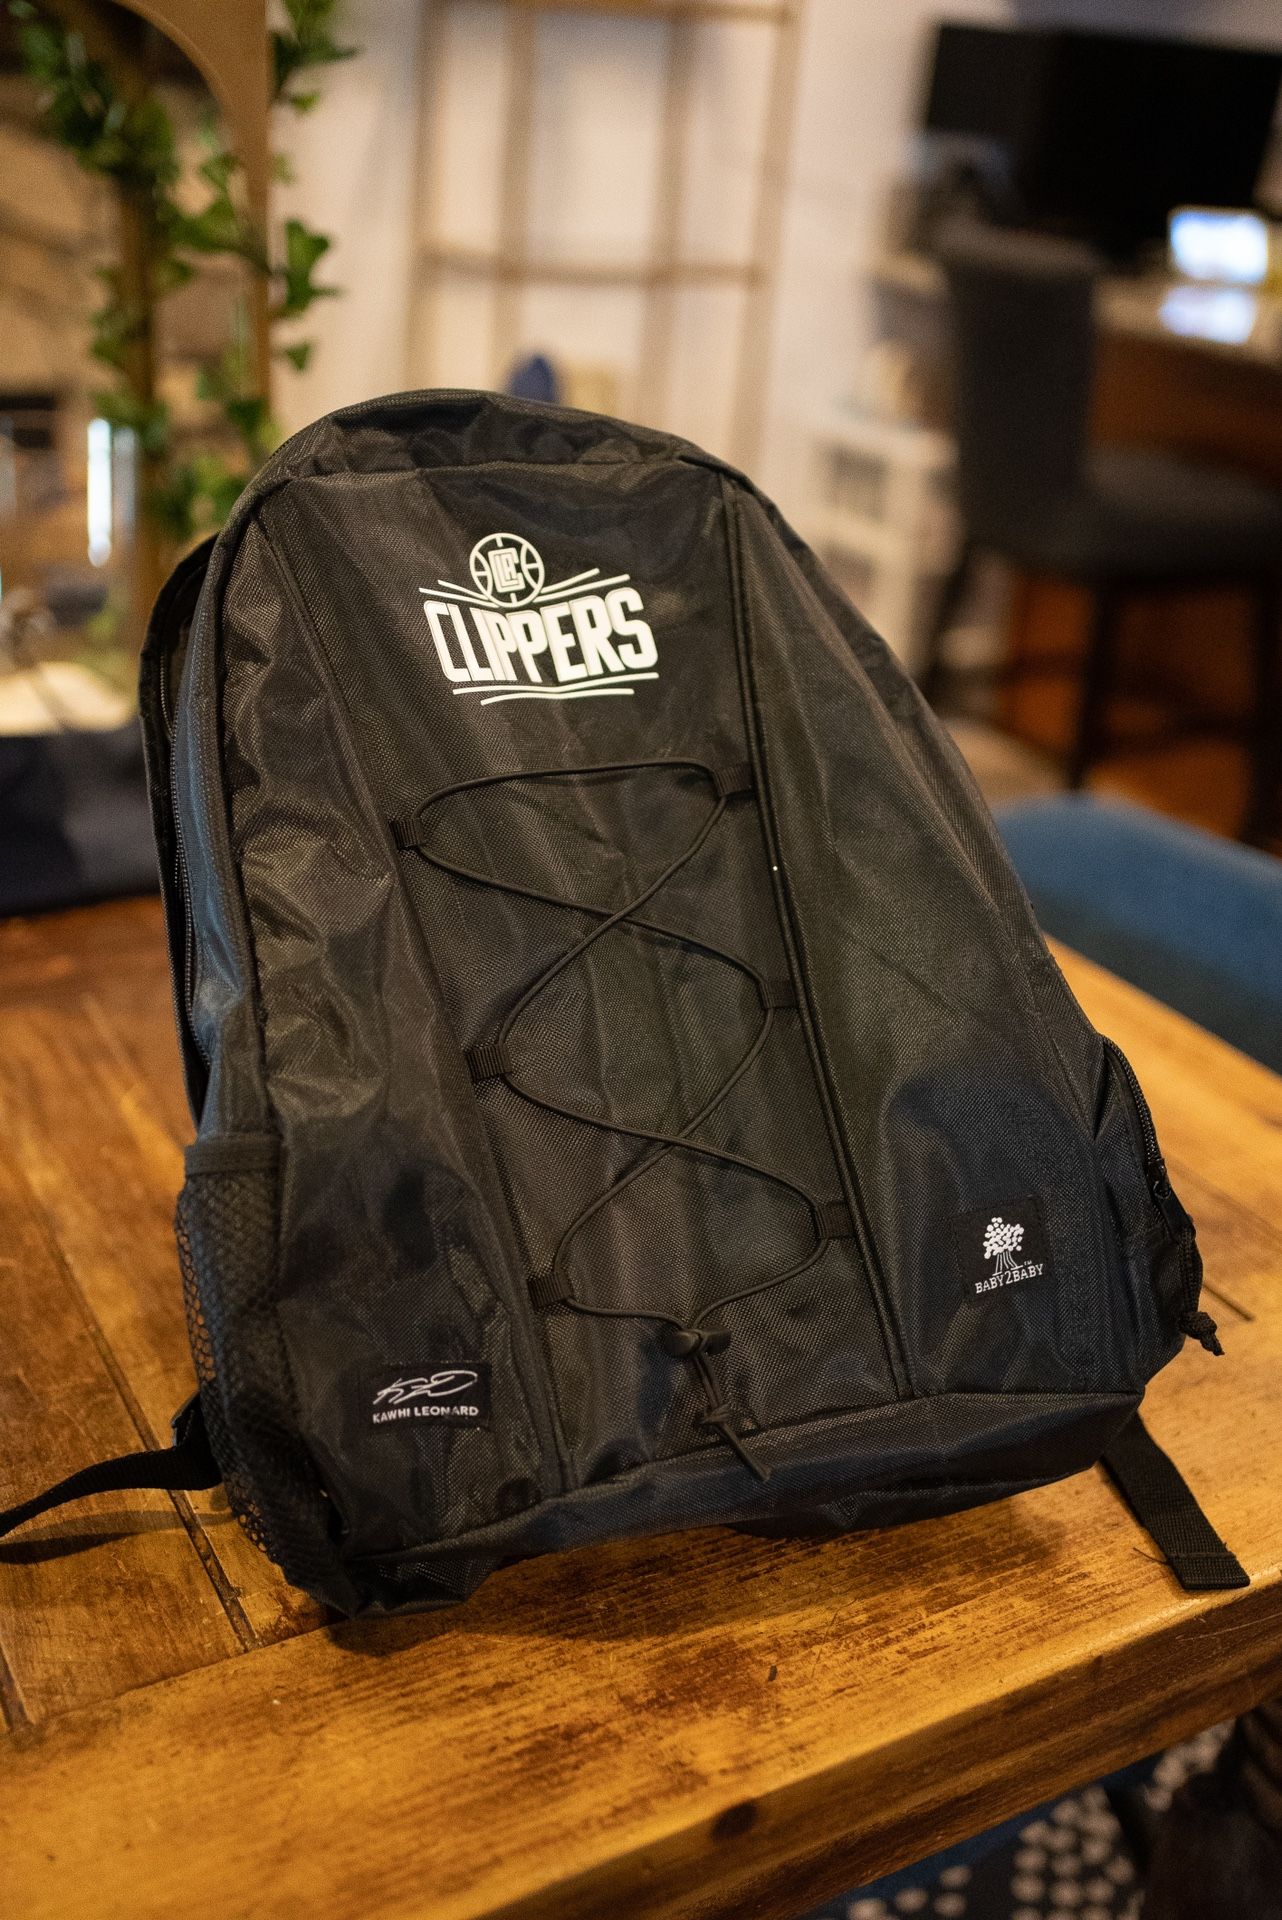 LA Clippers Backpack